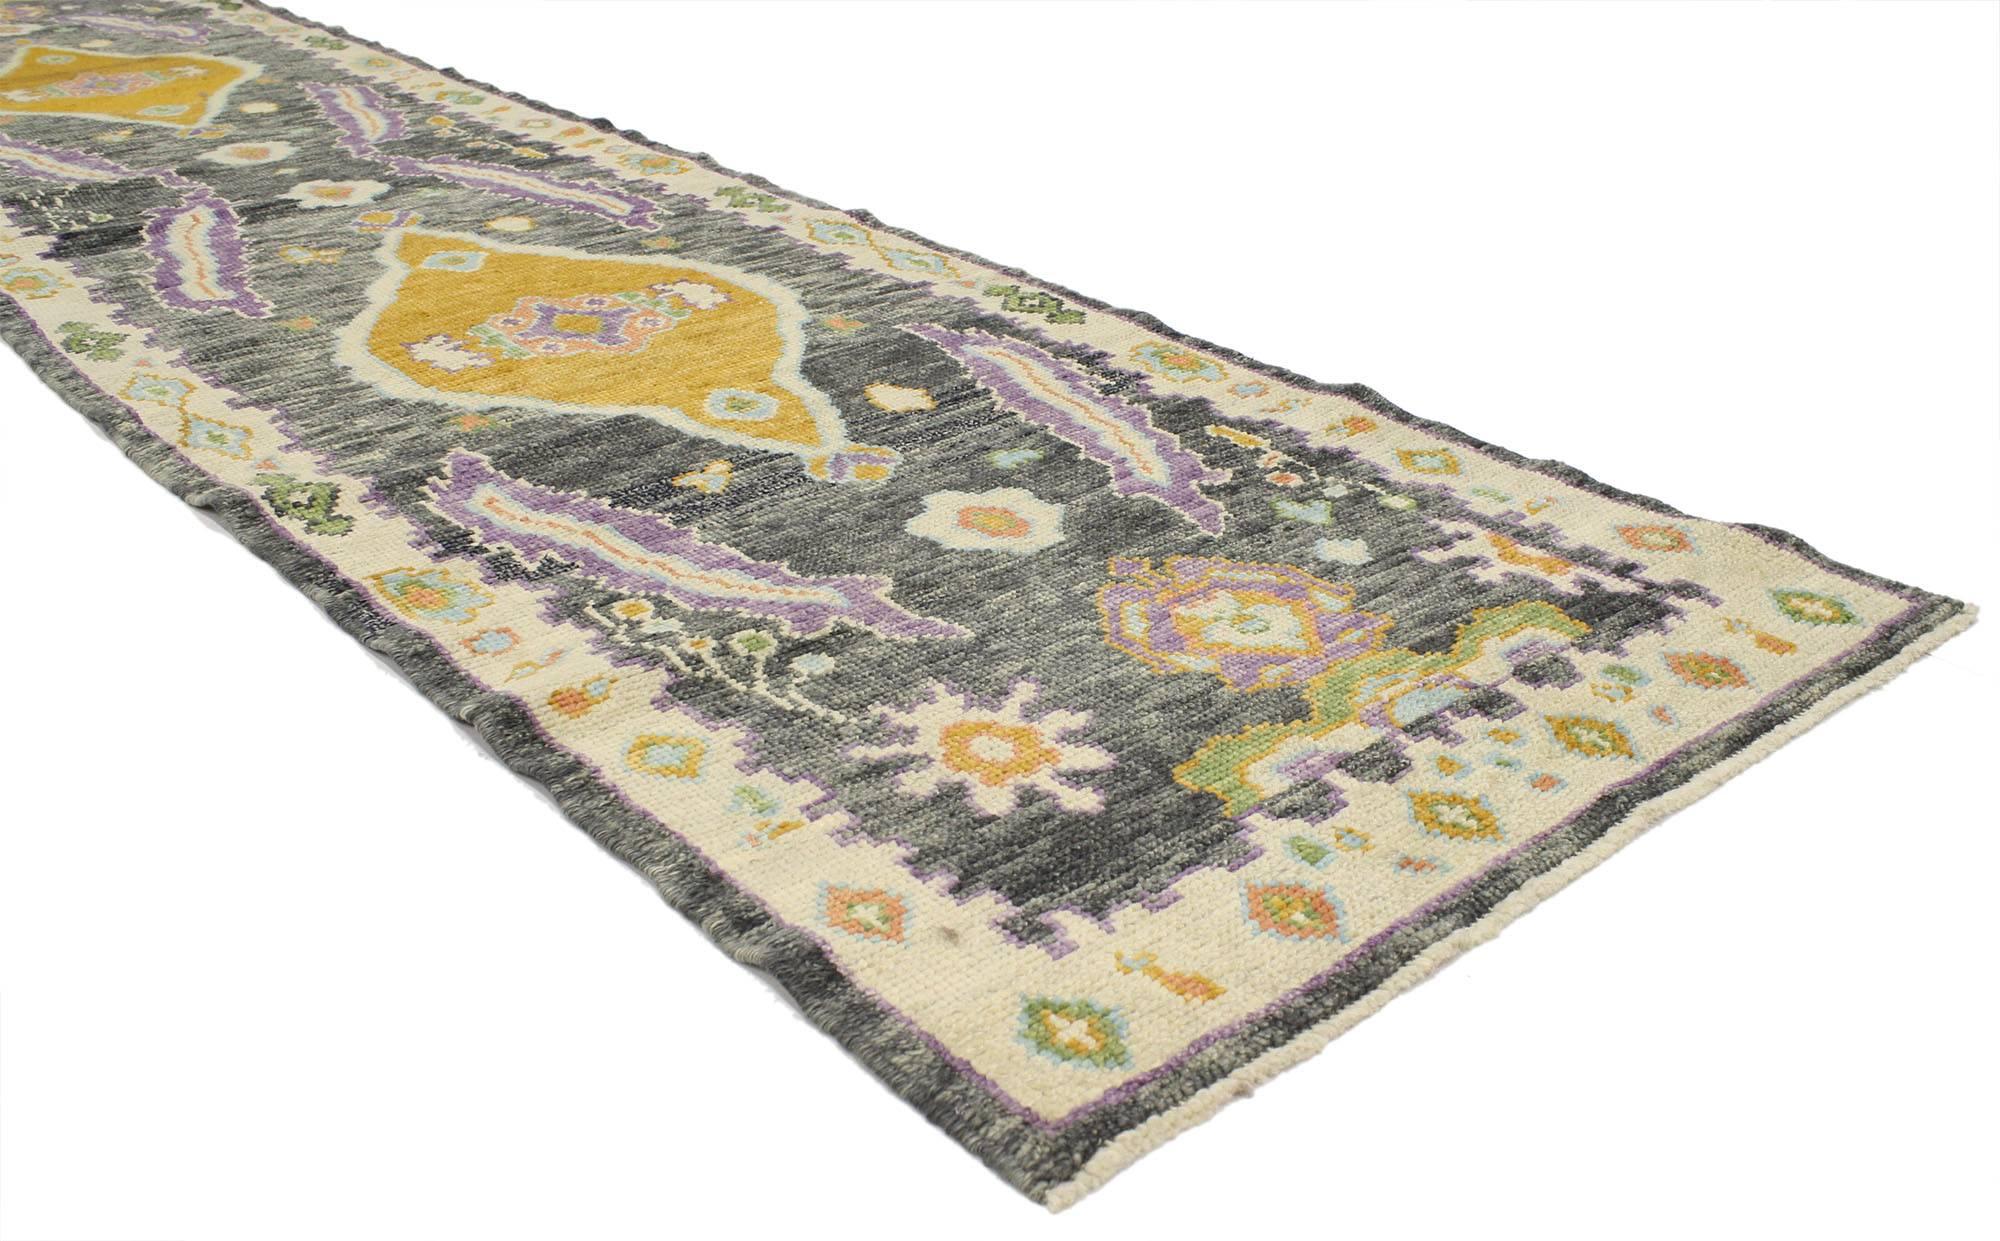 52254, contemporary Turkish Oushak runner with modern style. Highly stylish yet modern eclectic, this contemporary Turkish Oushak runner is ideal for nearly any fashion-forward home. This timeless Oushak design has been given a twist to effortlessly